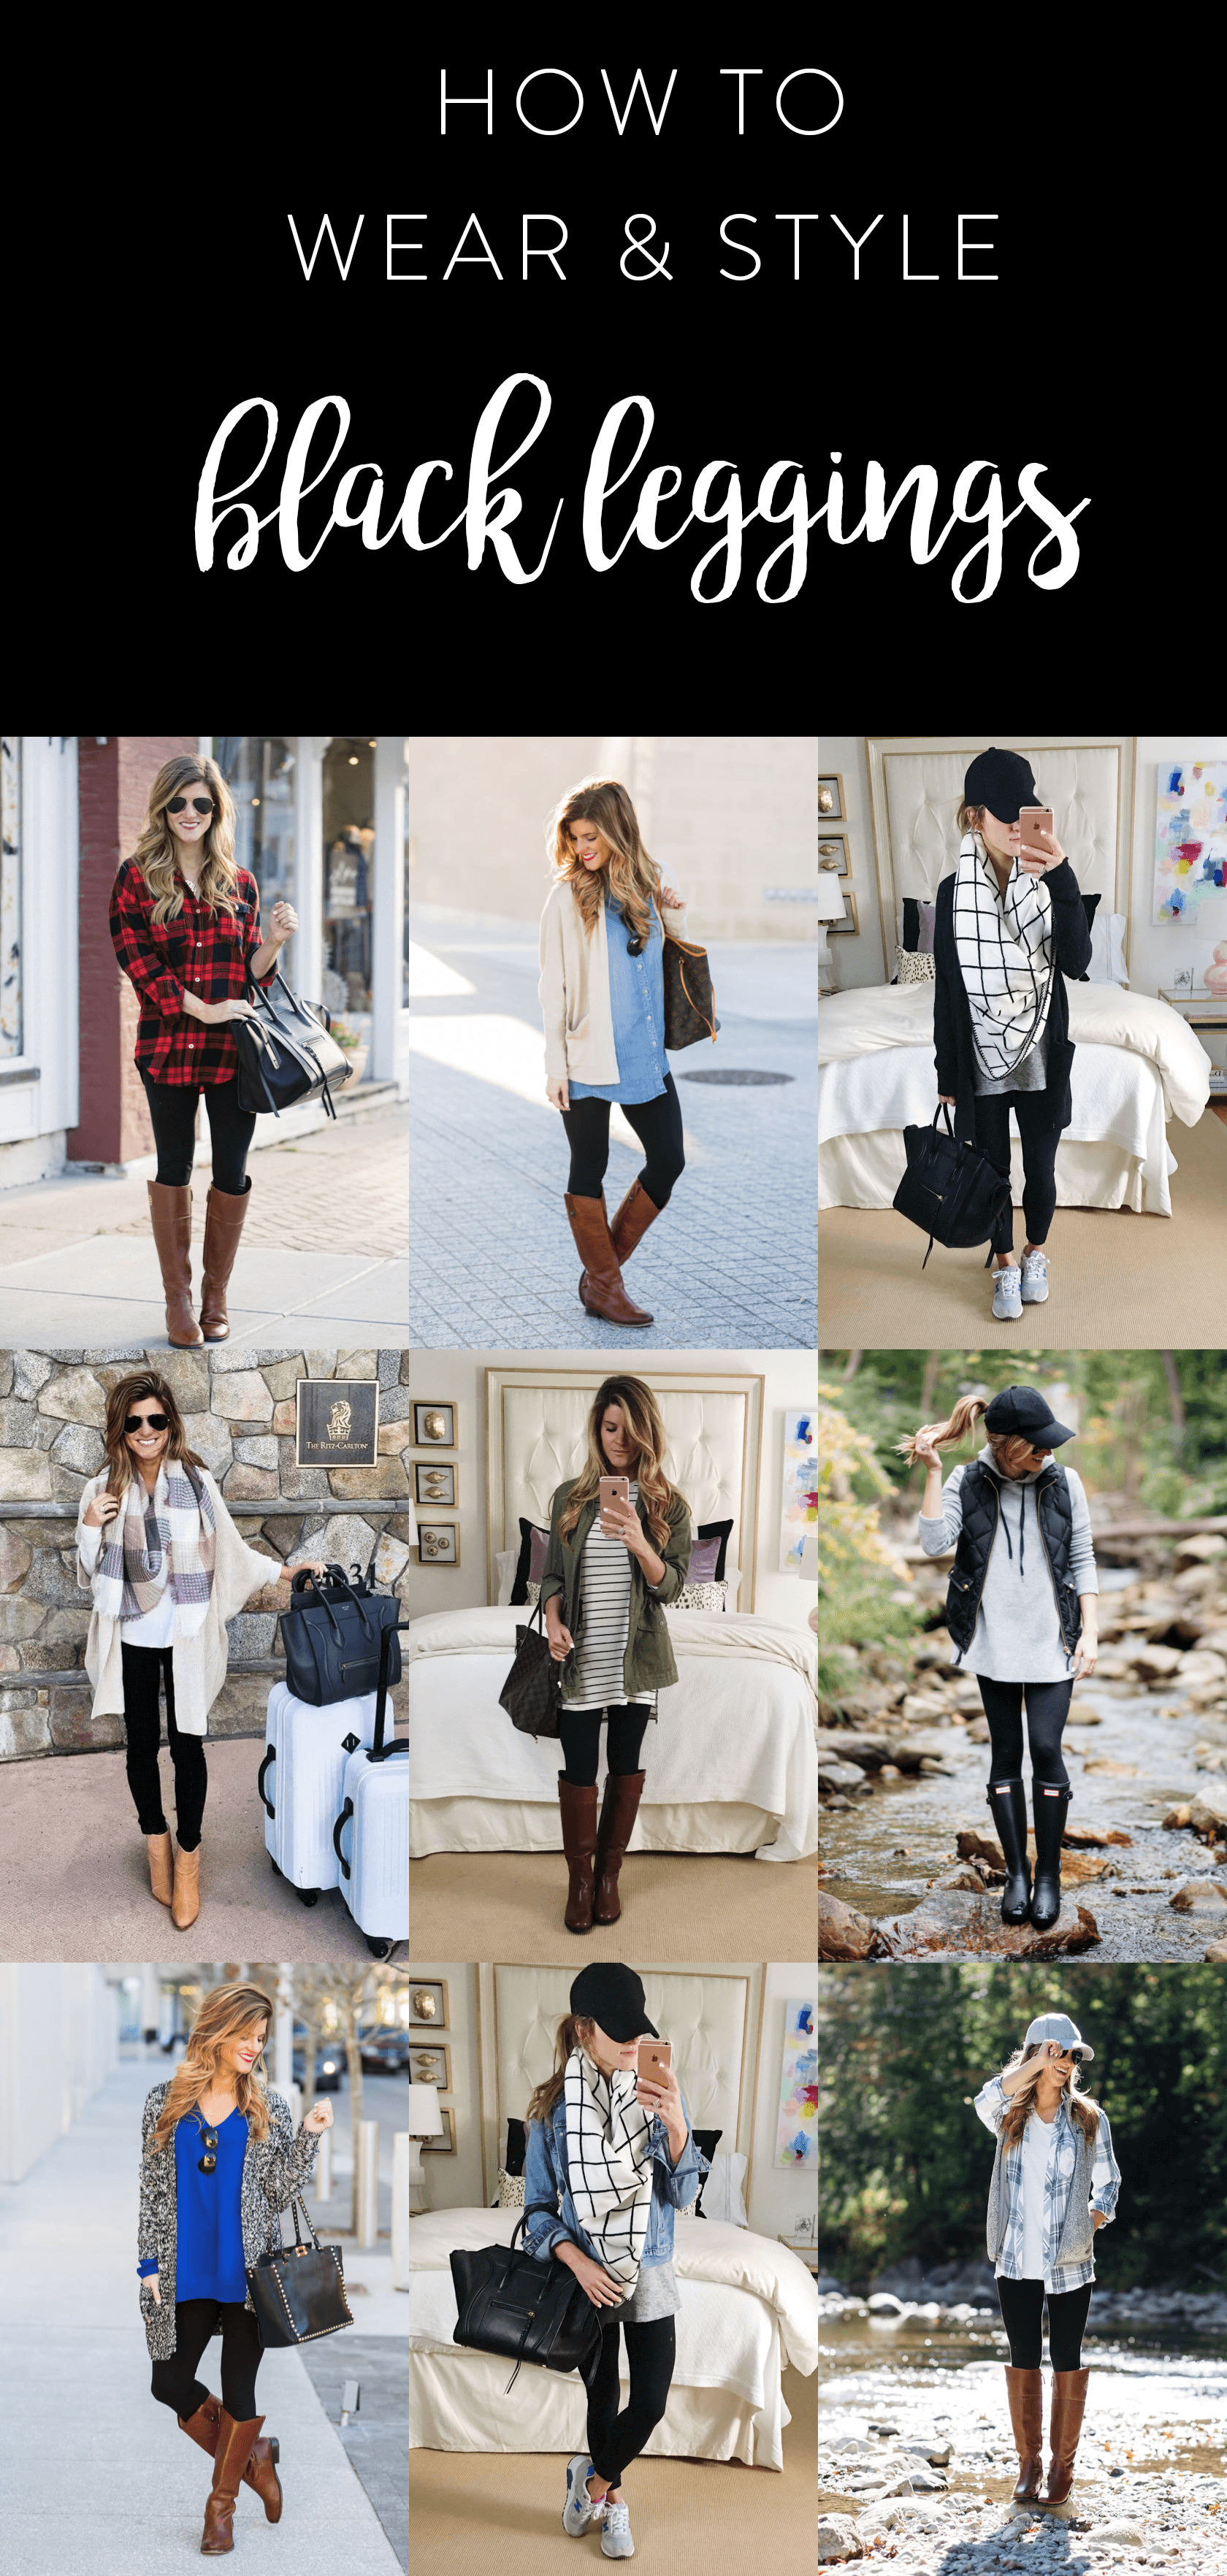 shoes to wear with black leggings